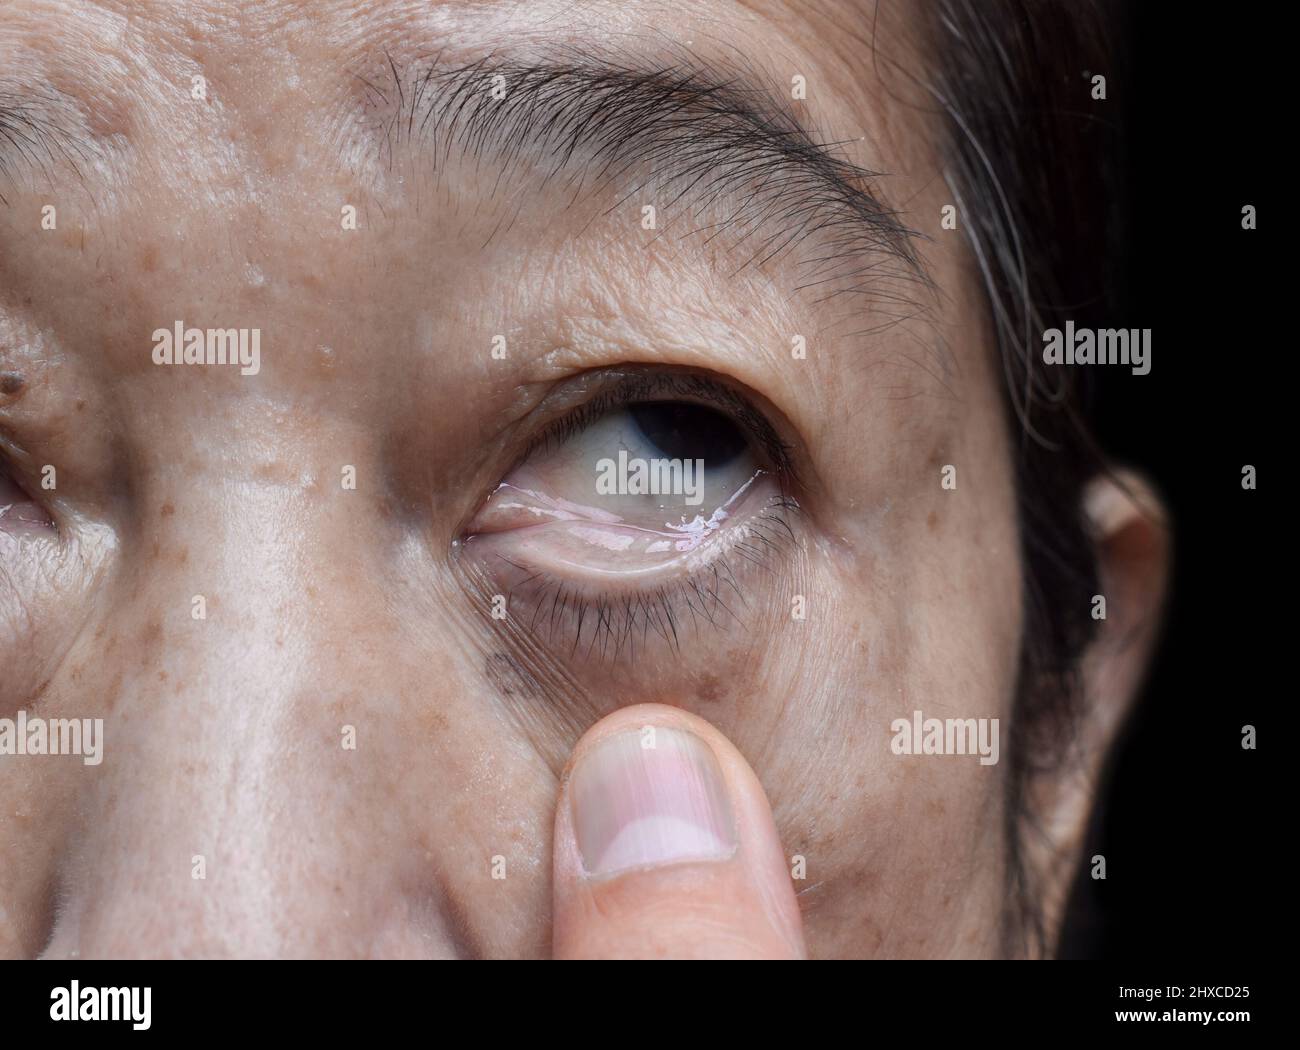 Pale skin of Asian elderly woman. Sign of anemia. Pallor at eyelid. Stock Photo